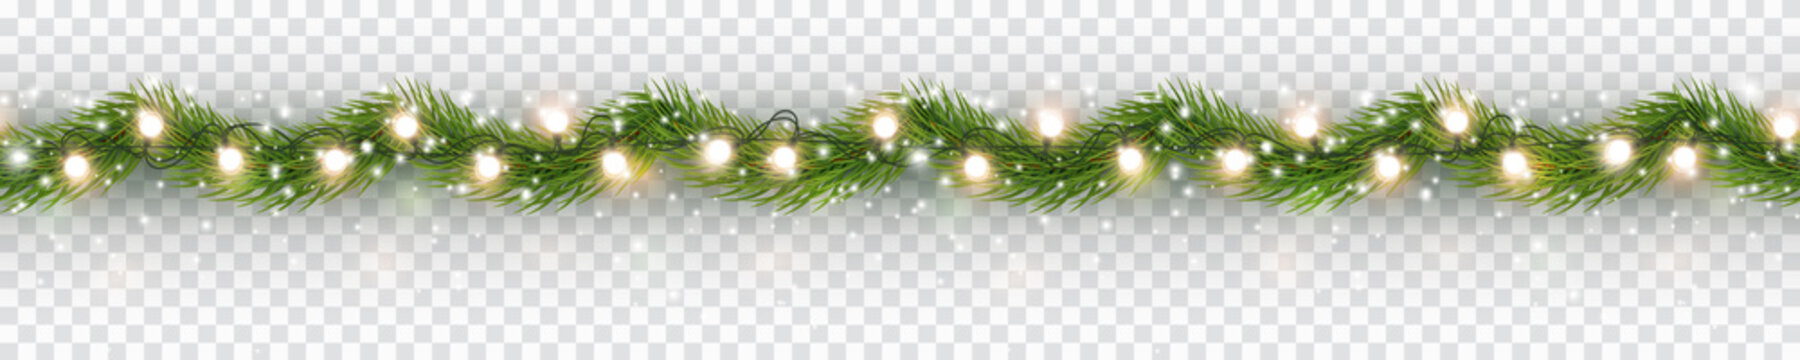 Border with green fir branches, gold lights isolated on transparent background. Pine, xmas evergreen plants seamless banner. Vector Christmas tree garland decoration